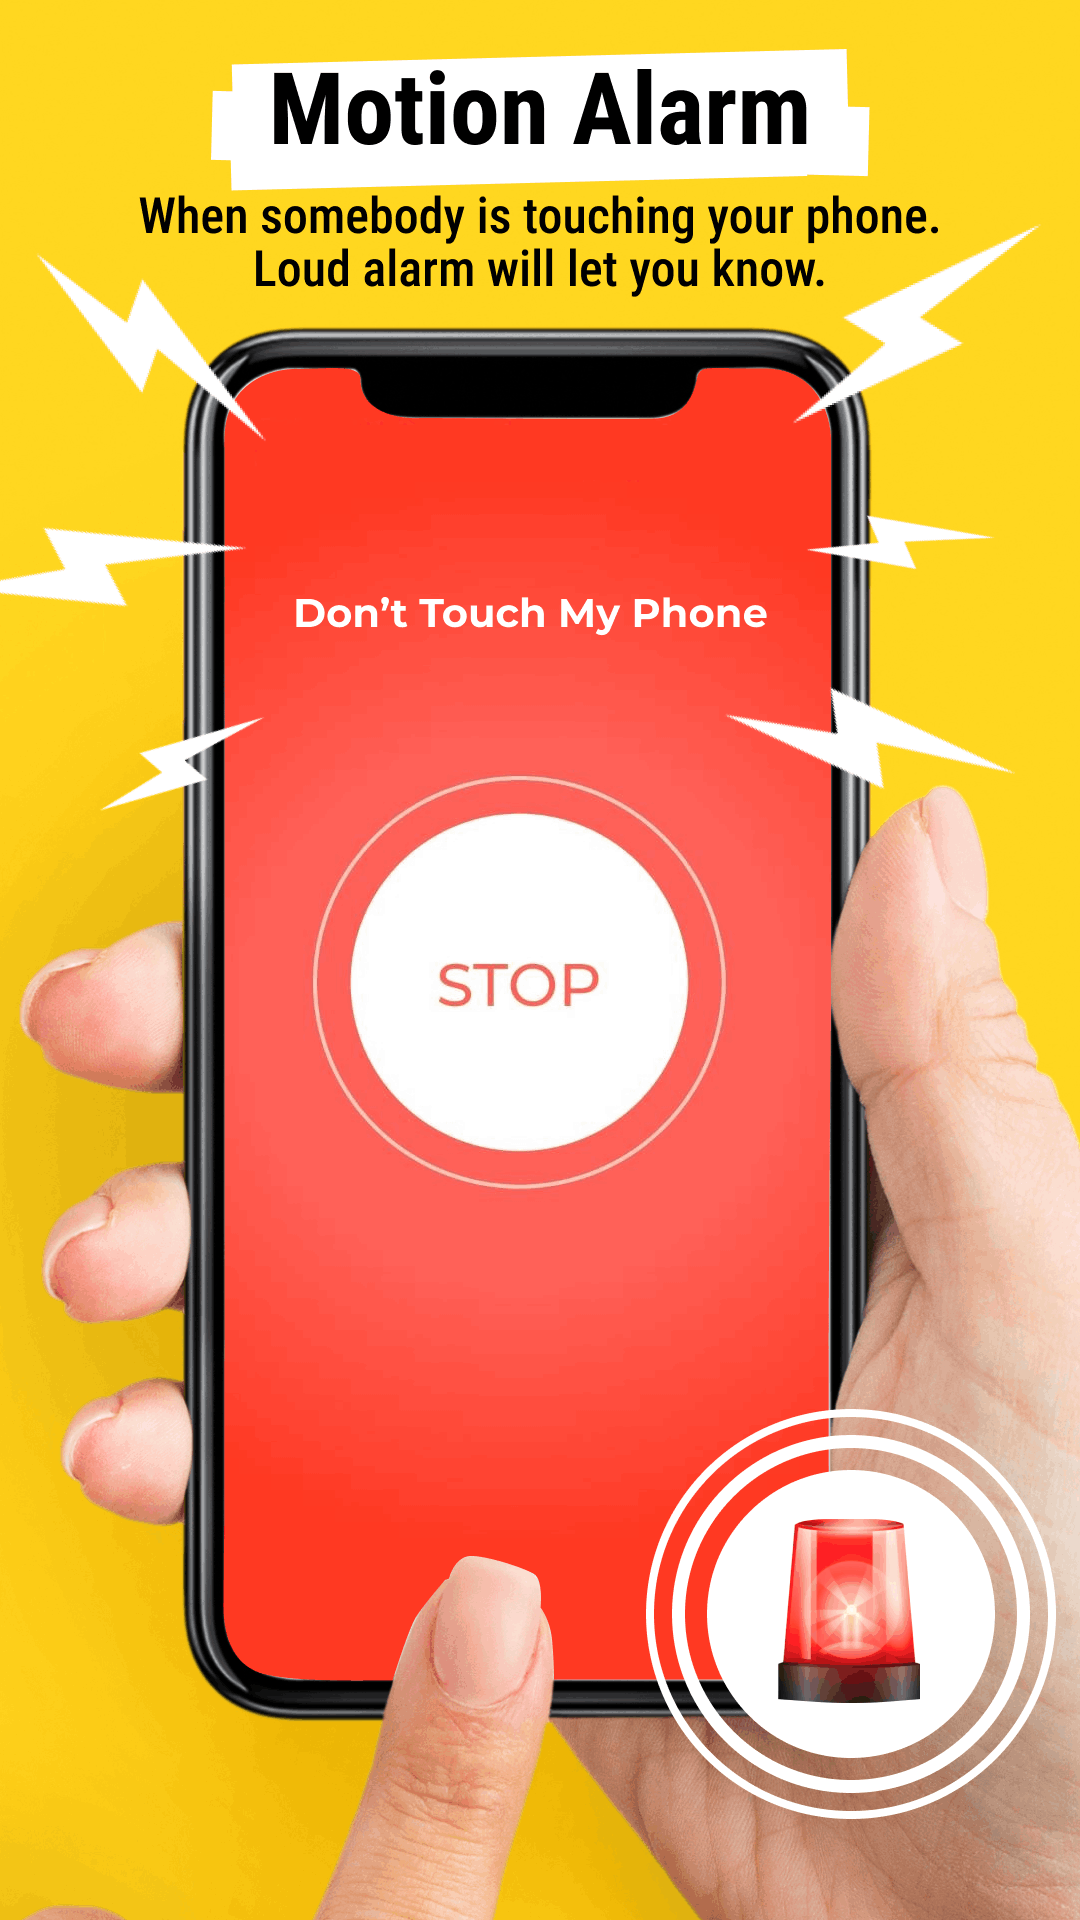 Who touched my phone - Motion Alarm